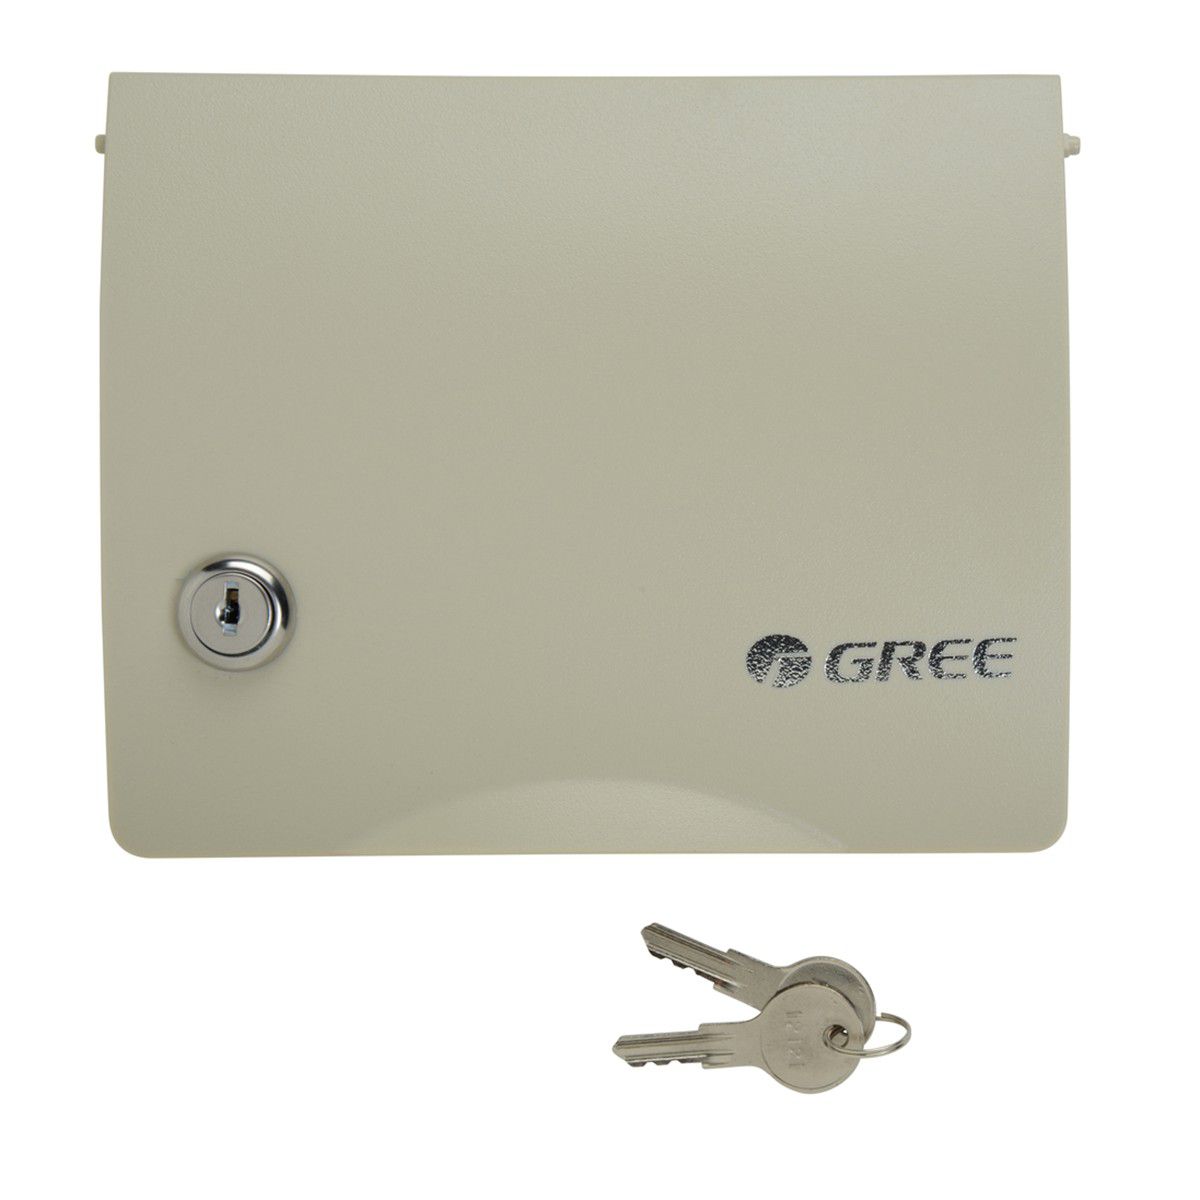 First America ETAC Locking door with keys to prevent unauthorized Access to control settings